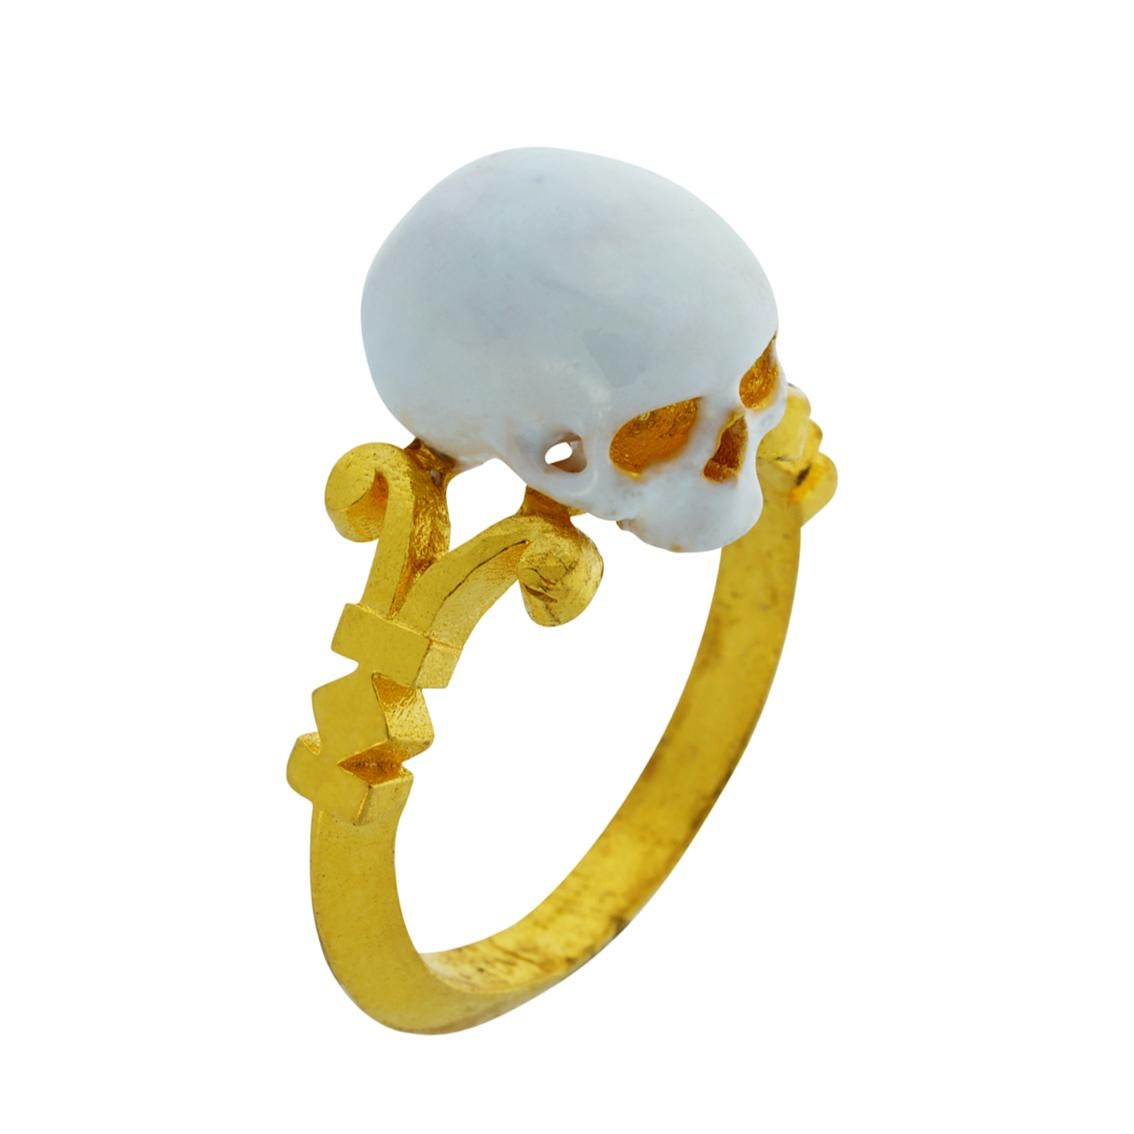 Baroque Catacomb Saint Skull Ring in 24 Karat Yellow Gold and Enamel For Sale